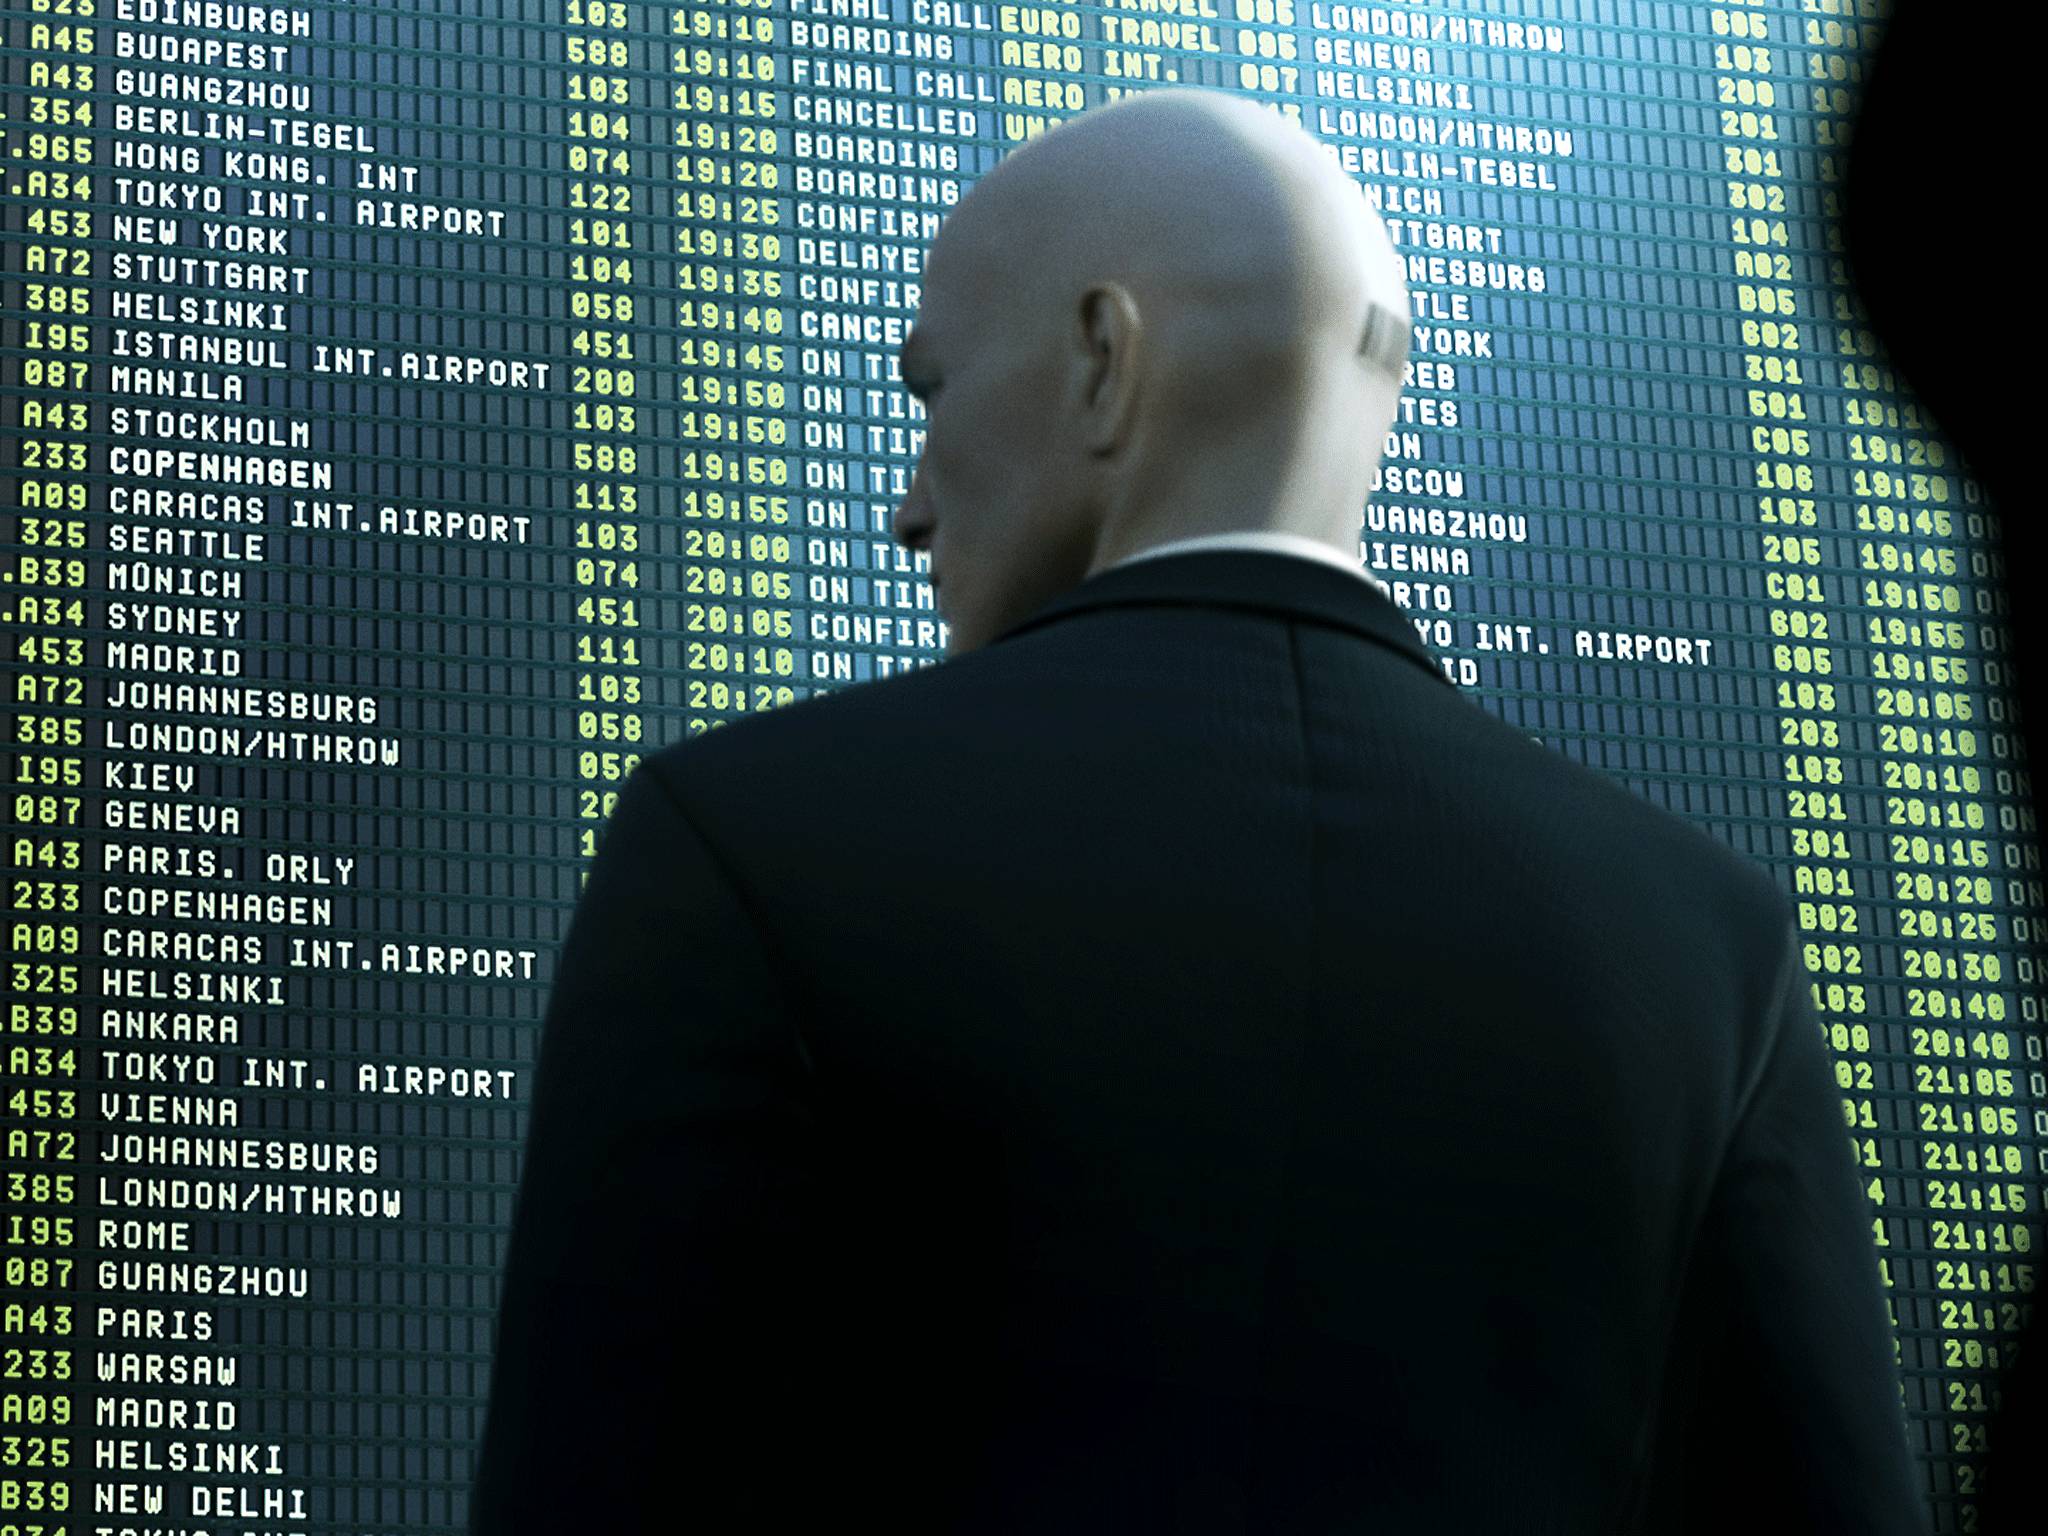 IO enclosed a new Hitman picture with the letter